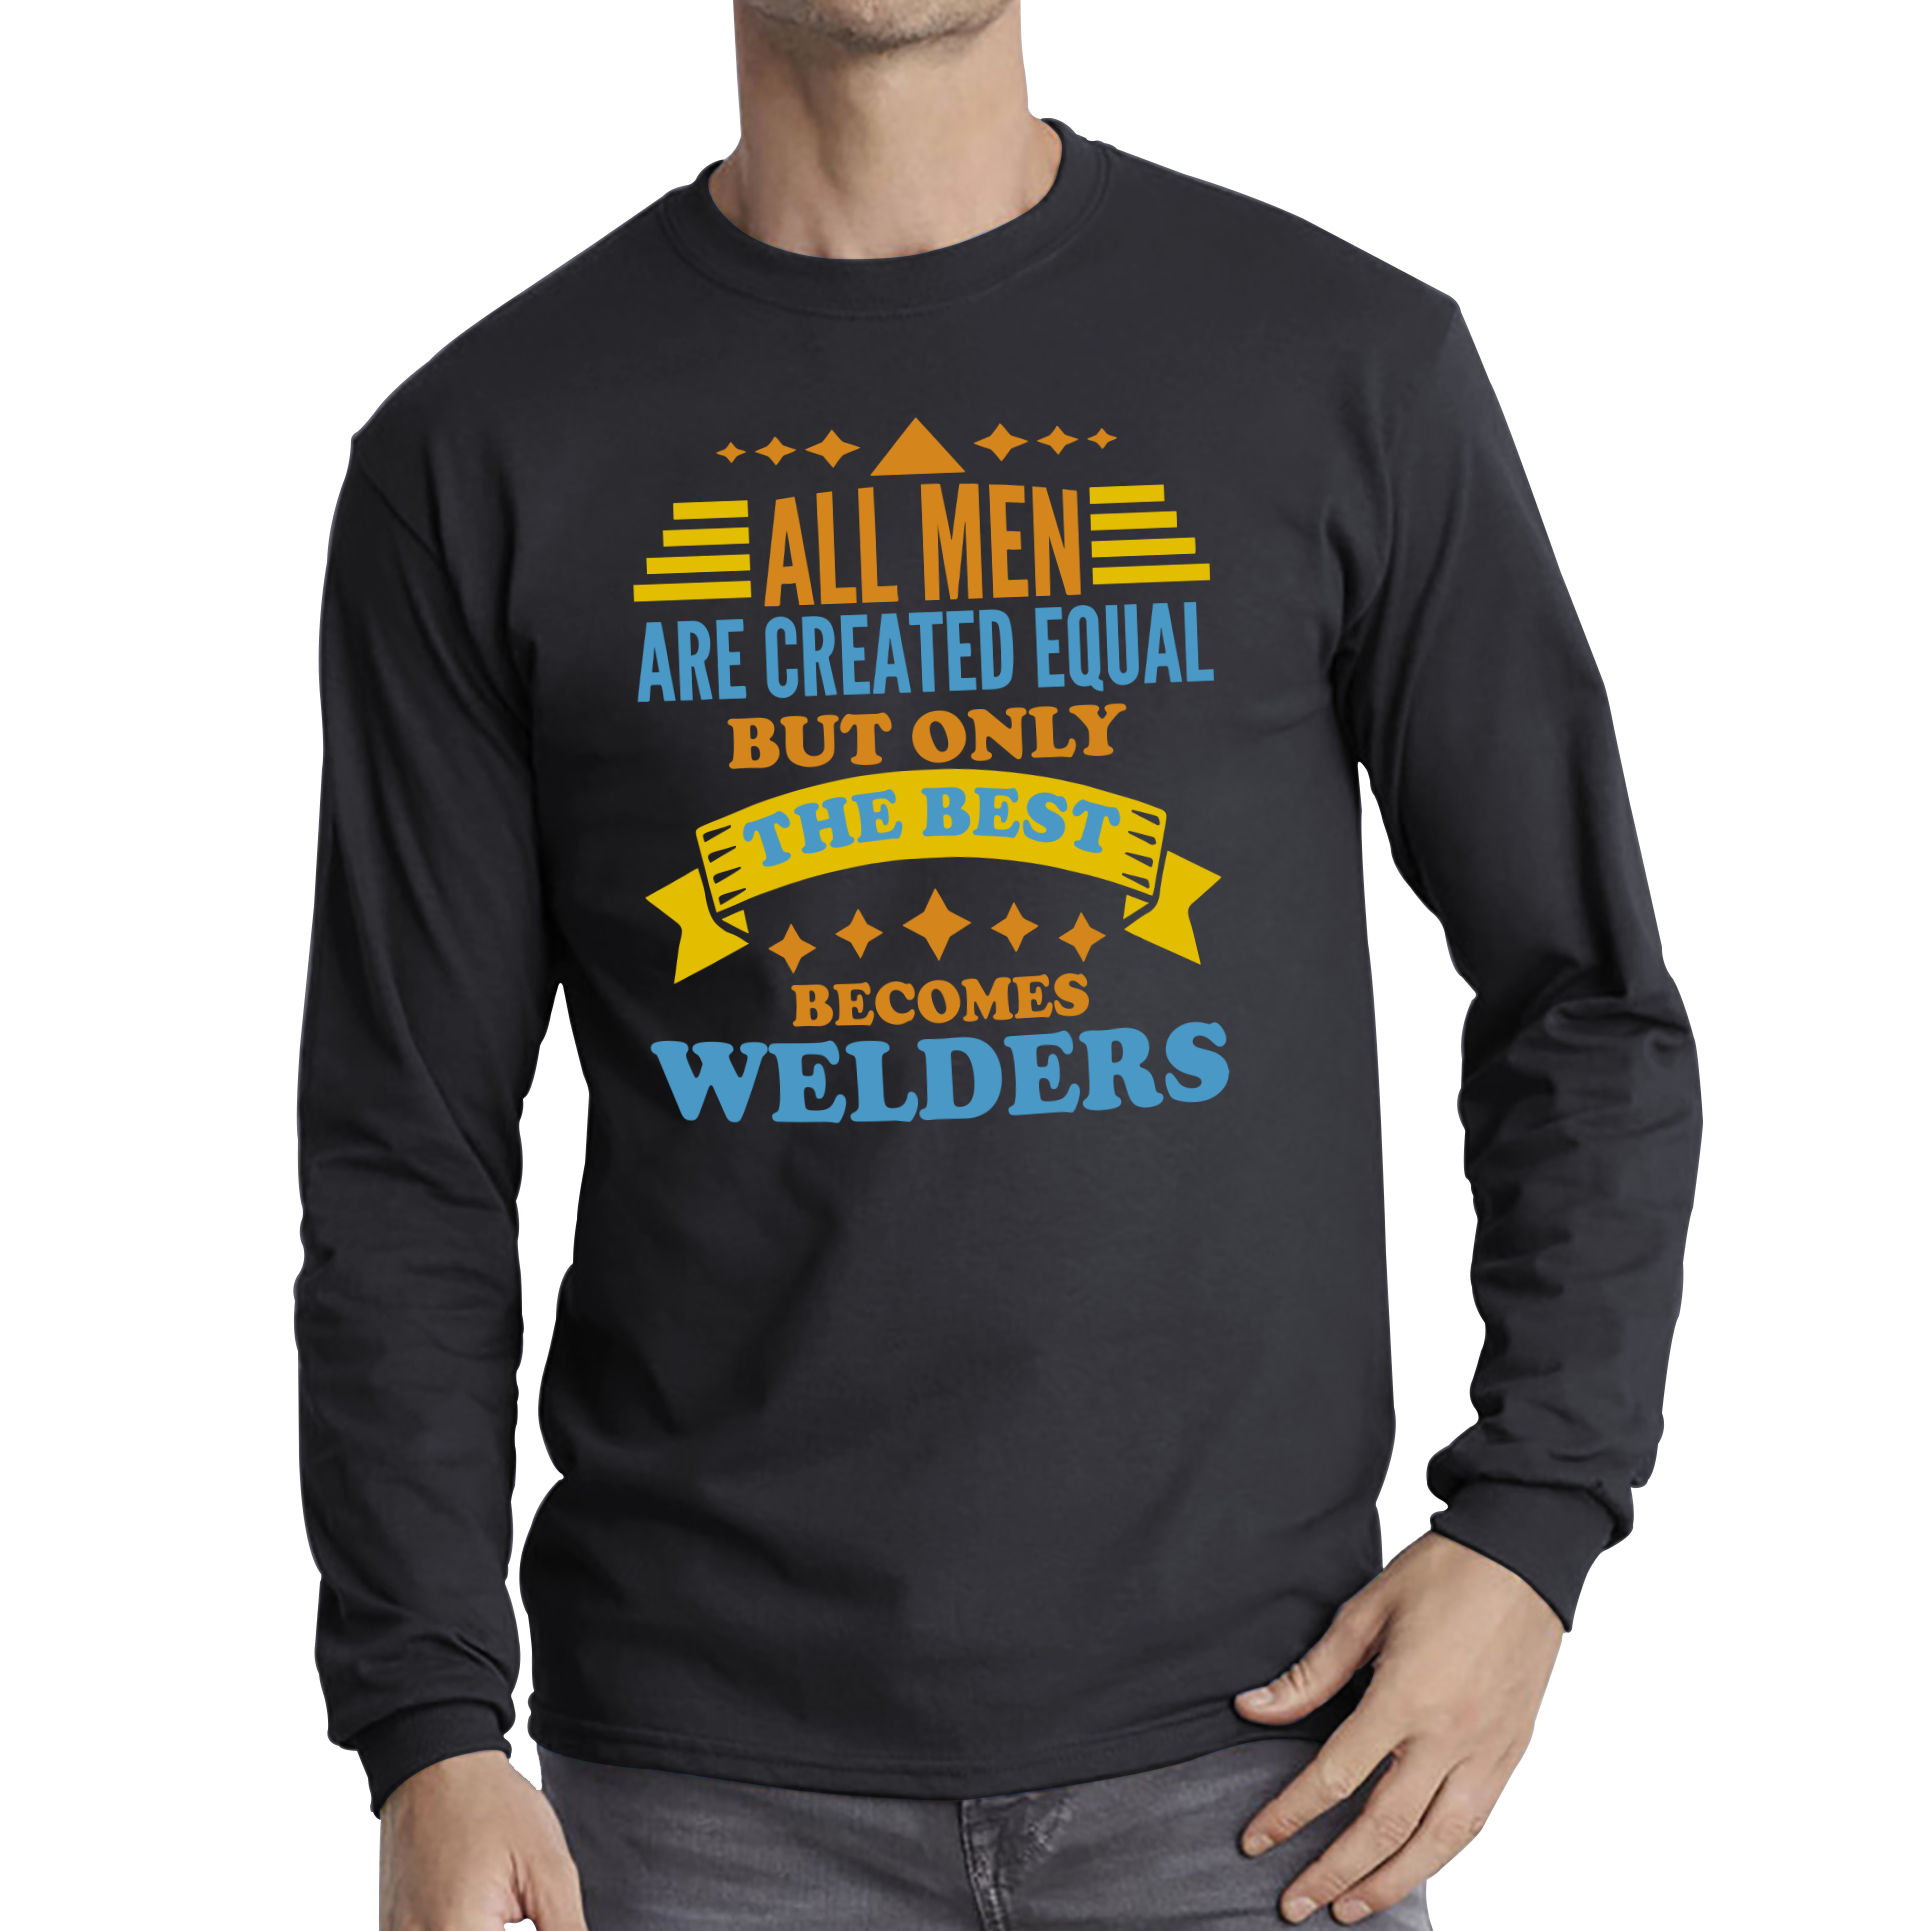 All Men Are Created Equal But Only The Best Becomes Welders Long Sleeve T Shirt